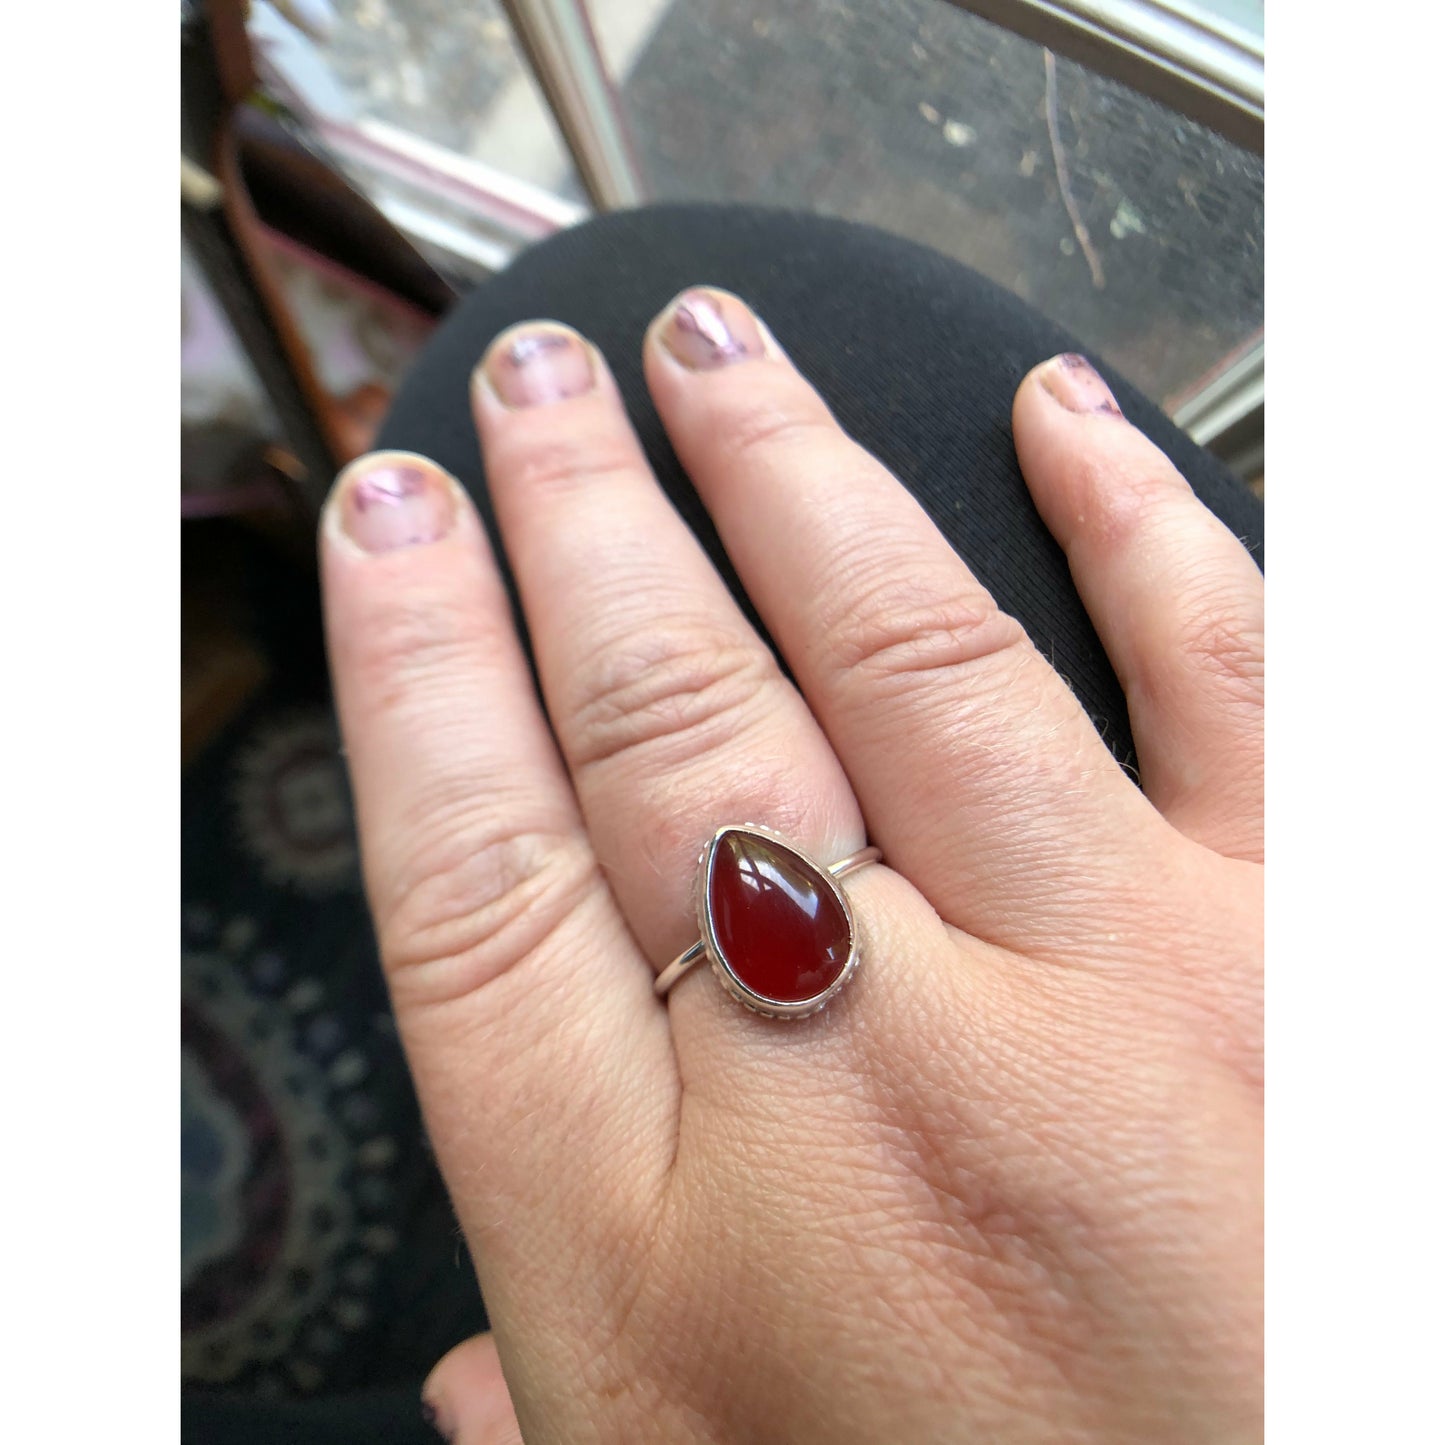 Pear shaped red ring with open back bezel, bezel mounts to the left and right side of the stone.